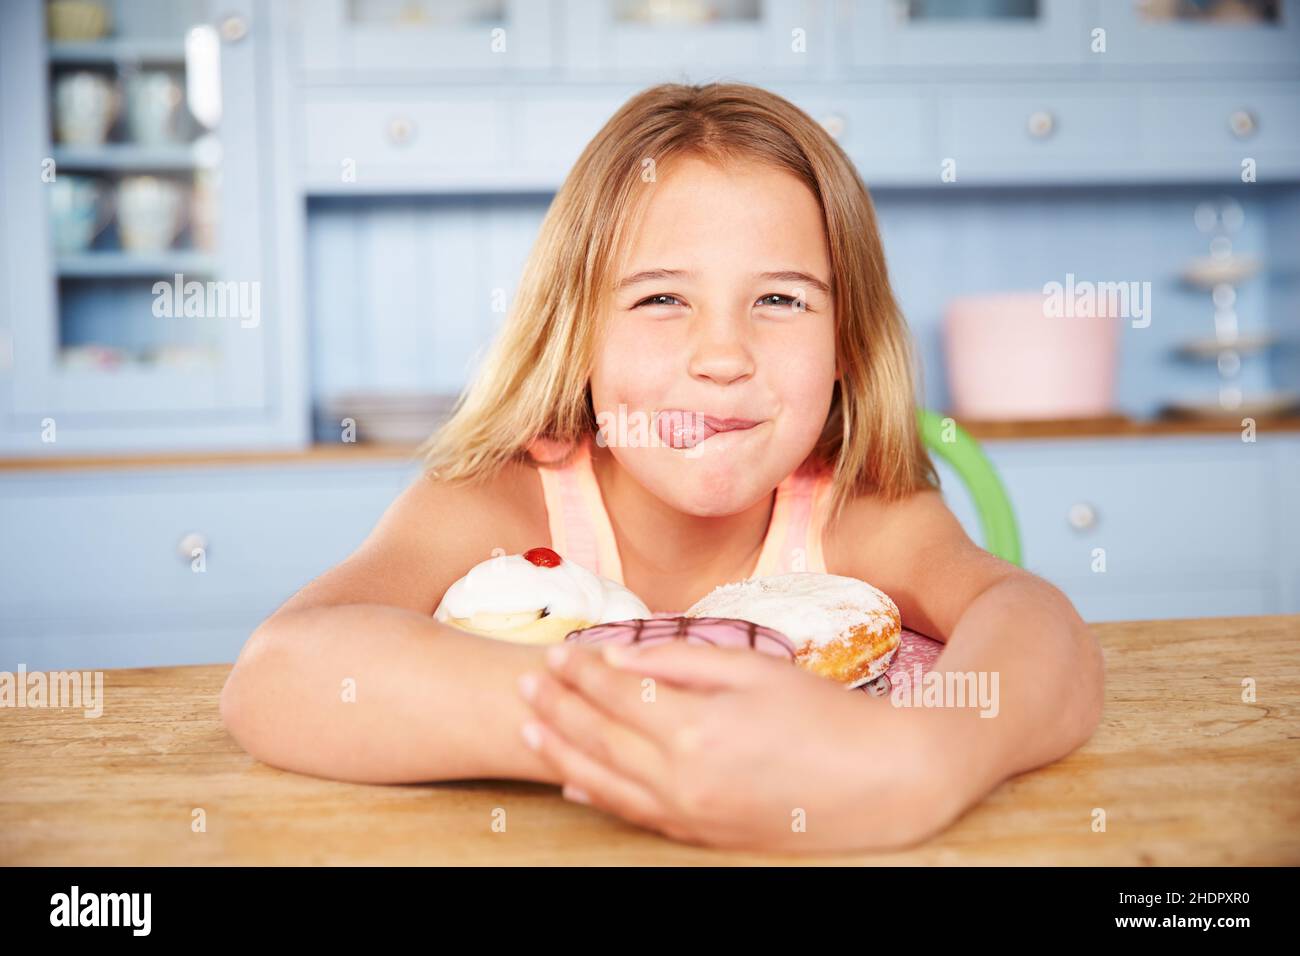 girl, sticking out tongue, sweet food, pie, girls, poking tongues, sticking out tongues, sweet foods, cake, pies Stock Photo